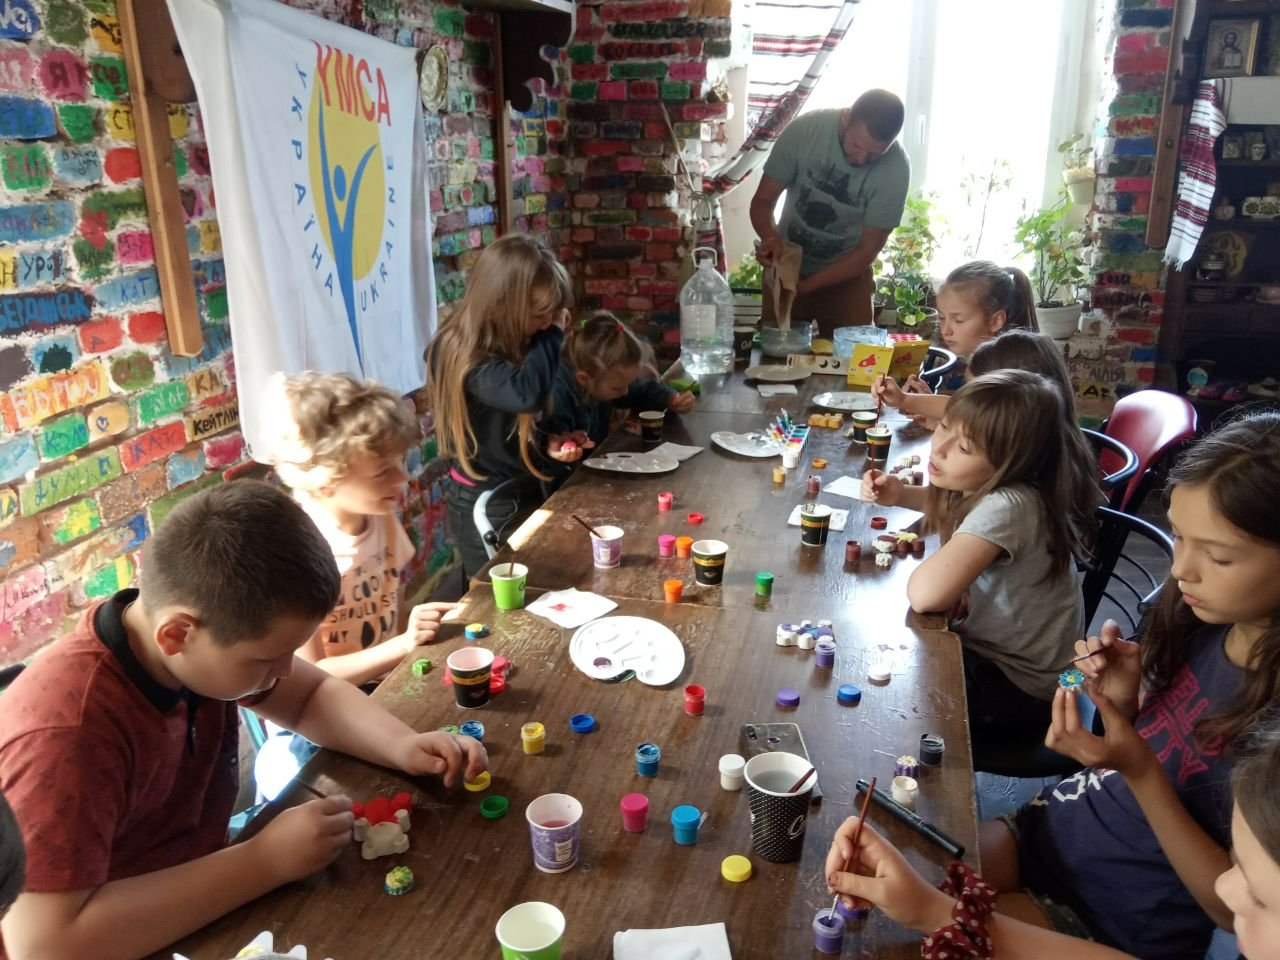 Kids in Ukraine doing crafts at a table